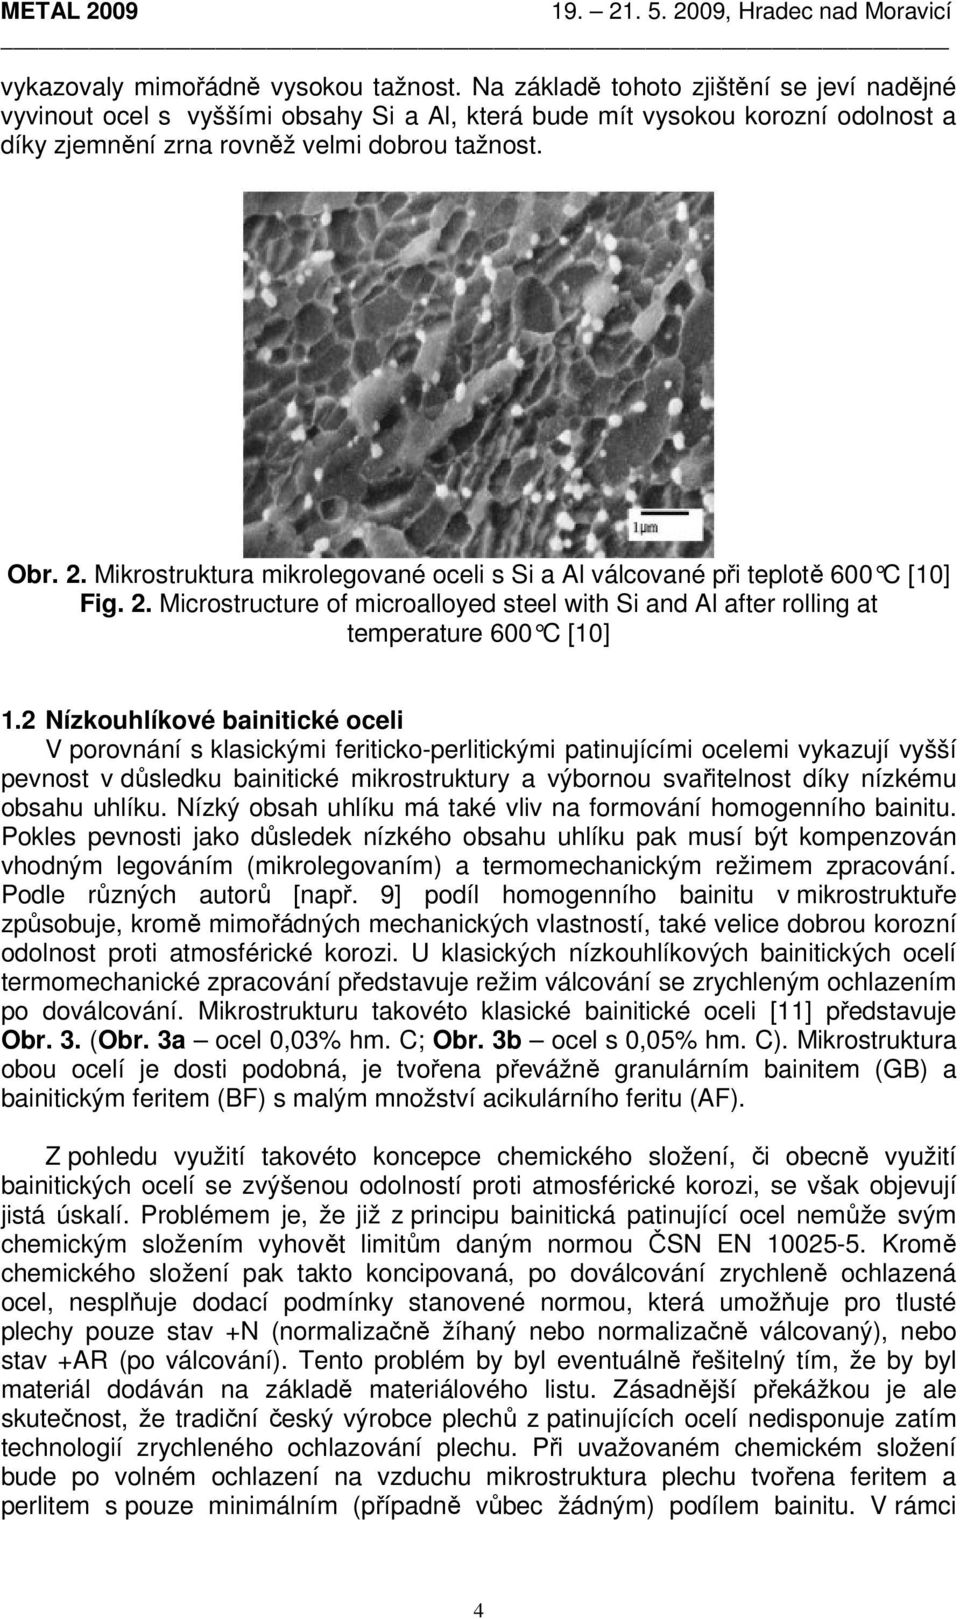 Mikrostruktura mikrolegované oceli s Si a Al válcované při teplotě 600 C [10] Fig. 2. Microstructure of microalloyed steel with Si and Al after rolling at temperature 600 C [10] 1.